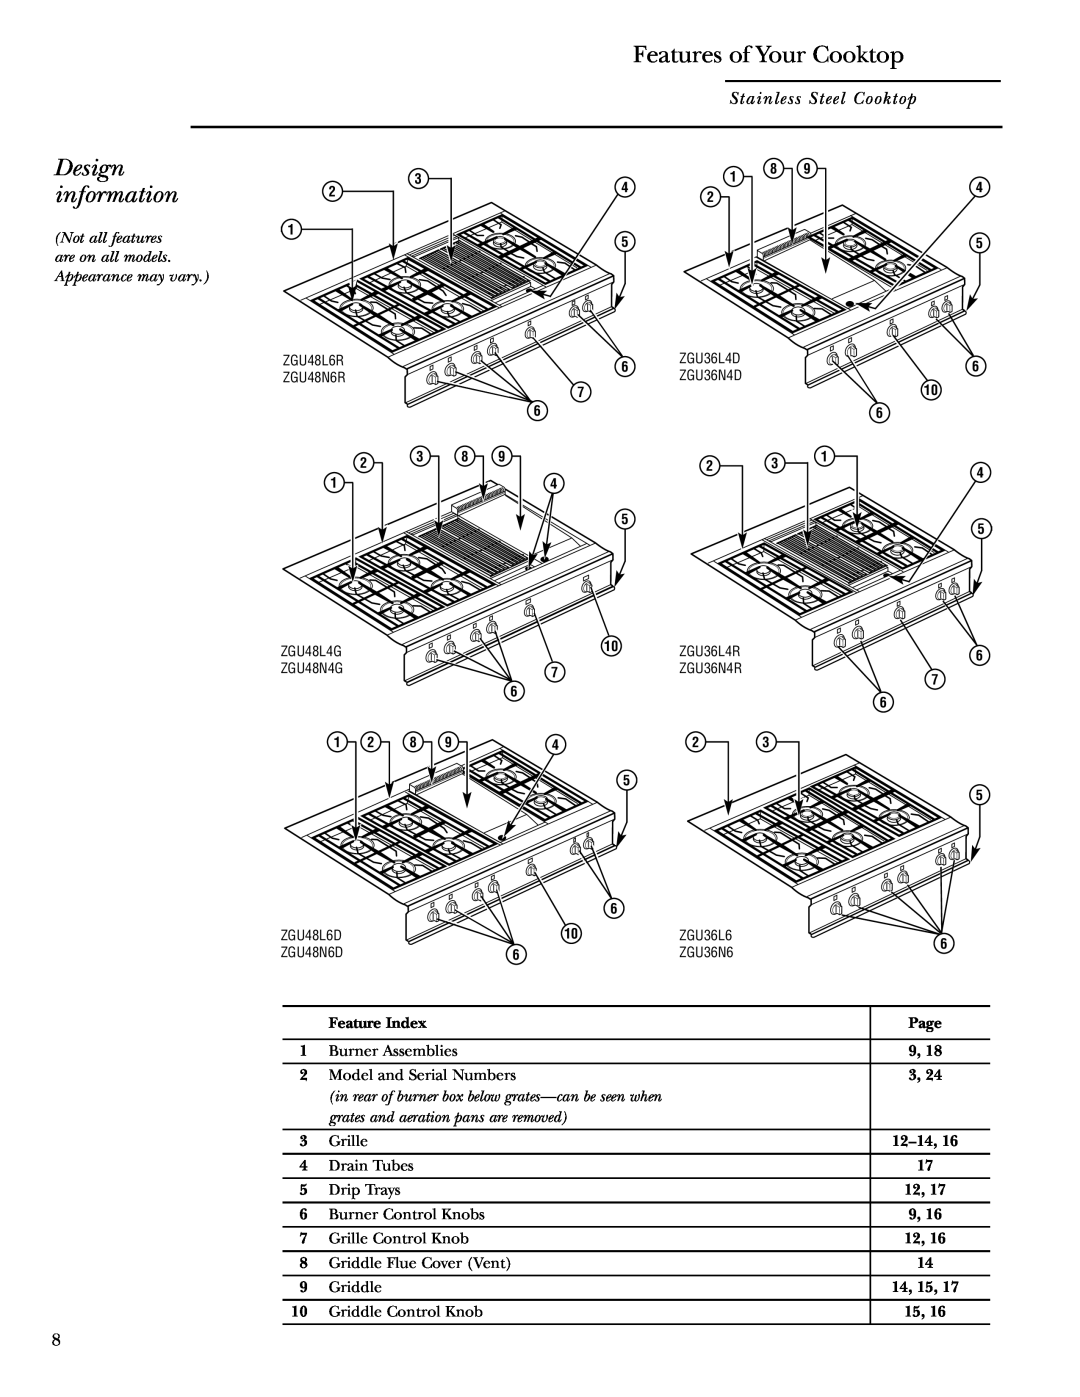 GE 36 owner manual Design information, Features of Your Cooktop, grates and aeration pans are removed 